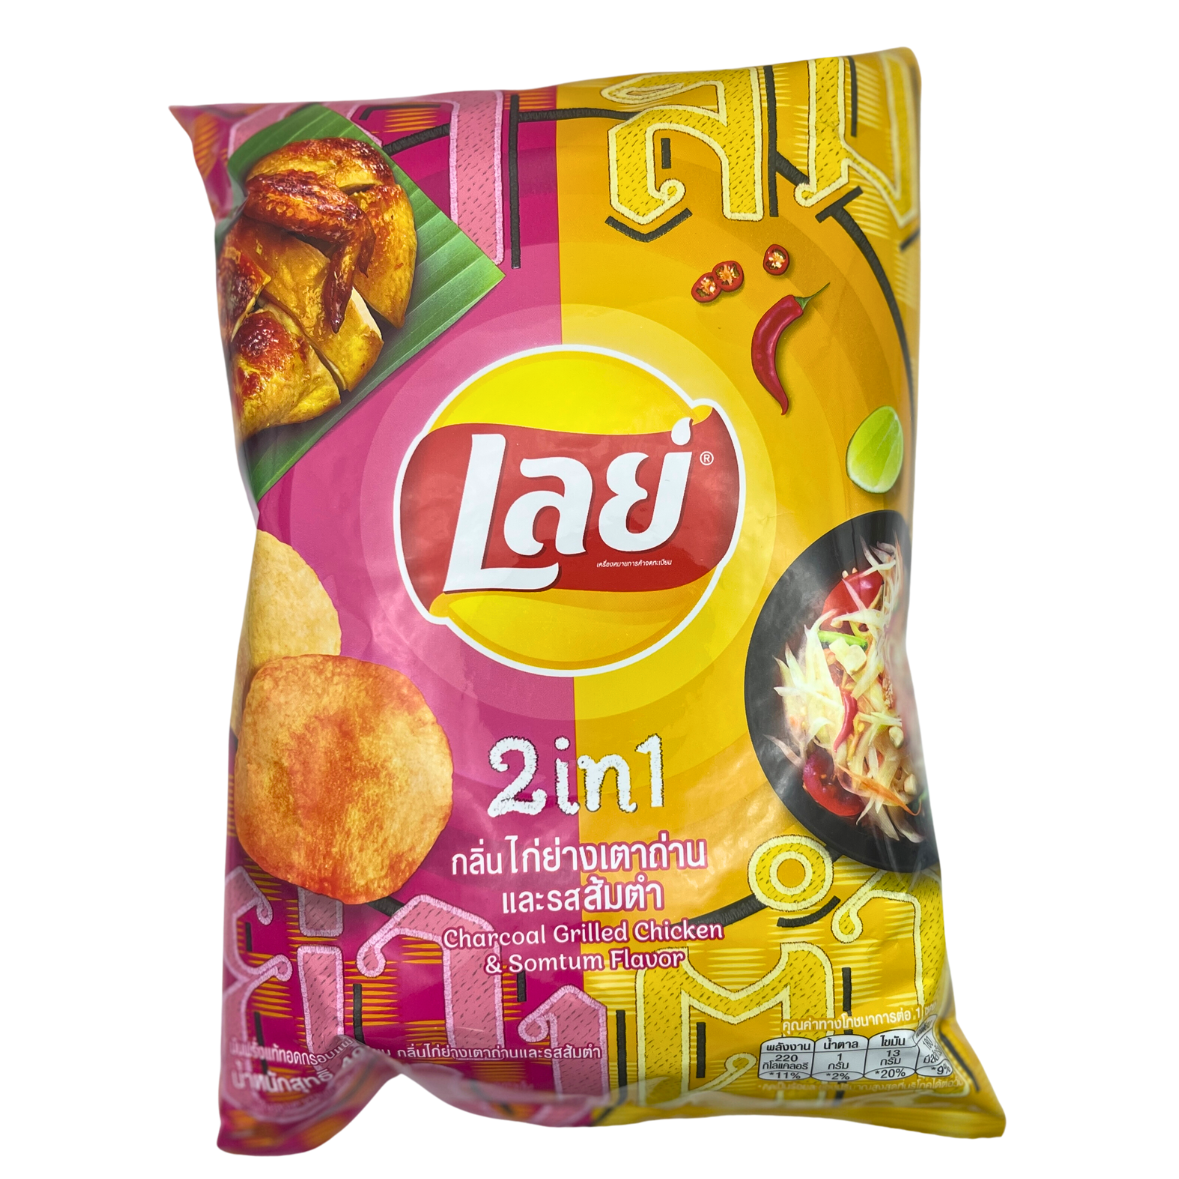 Lay's Charcoal Grilled Chicken & Somtum